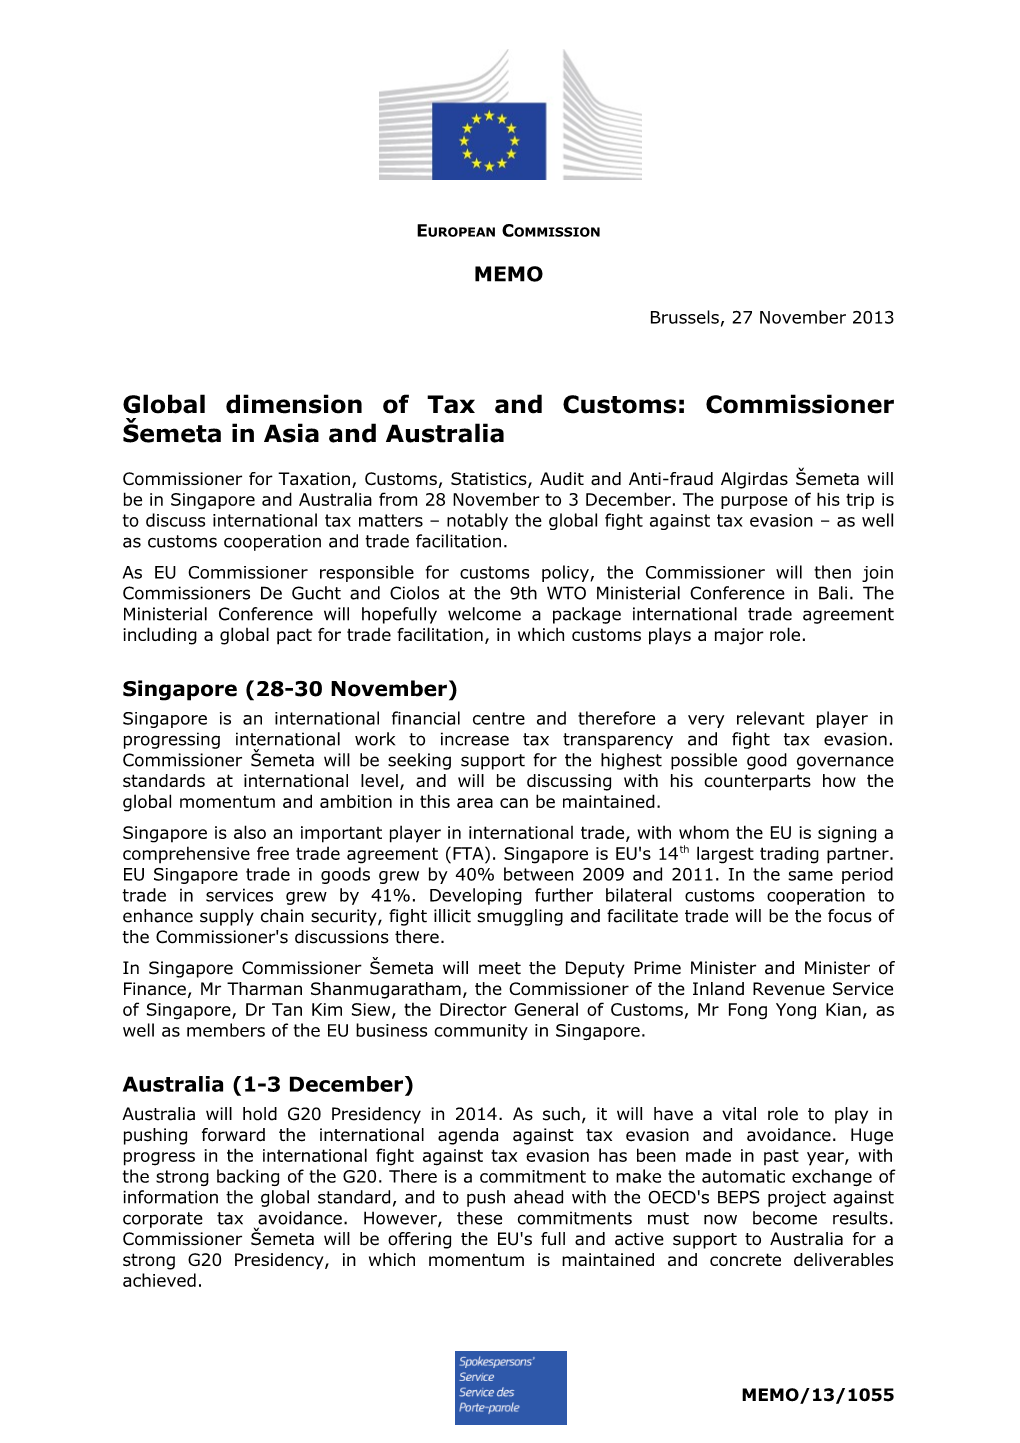 Global Dimension of Tax and Customs: Commissioner Šemeta in Asia and Australia